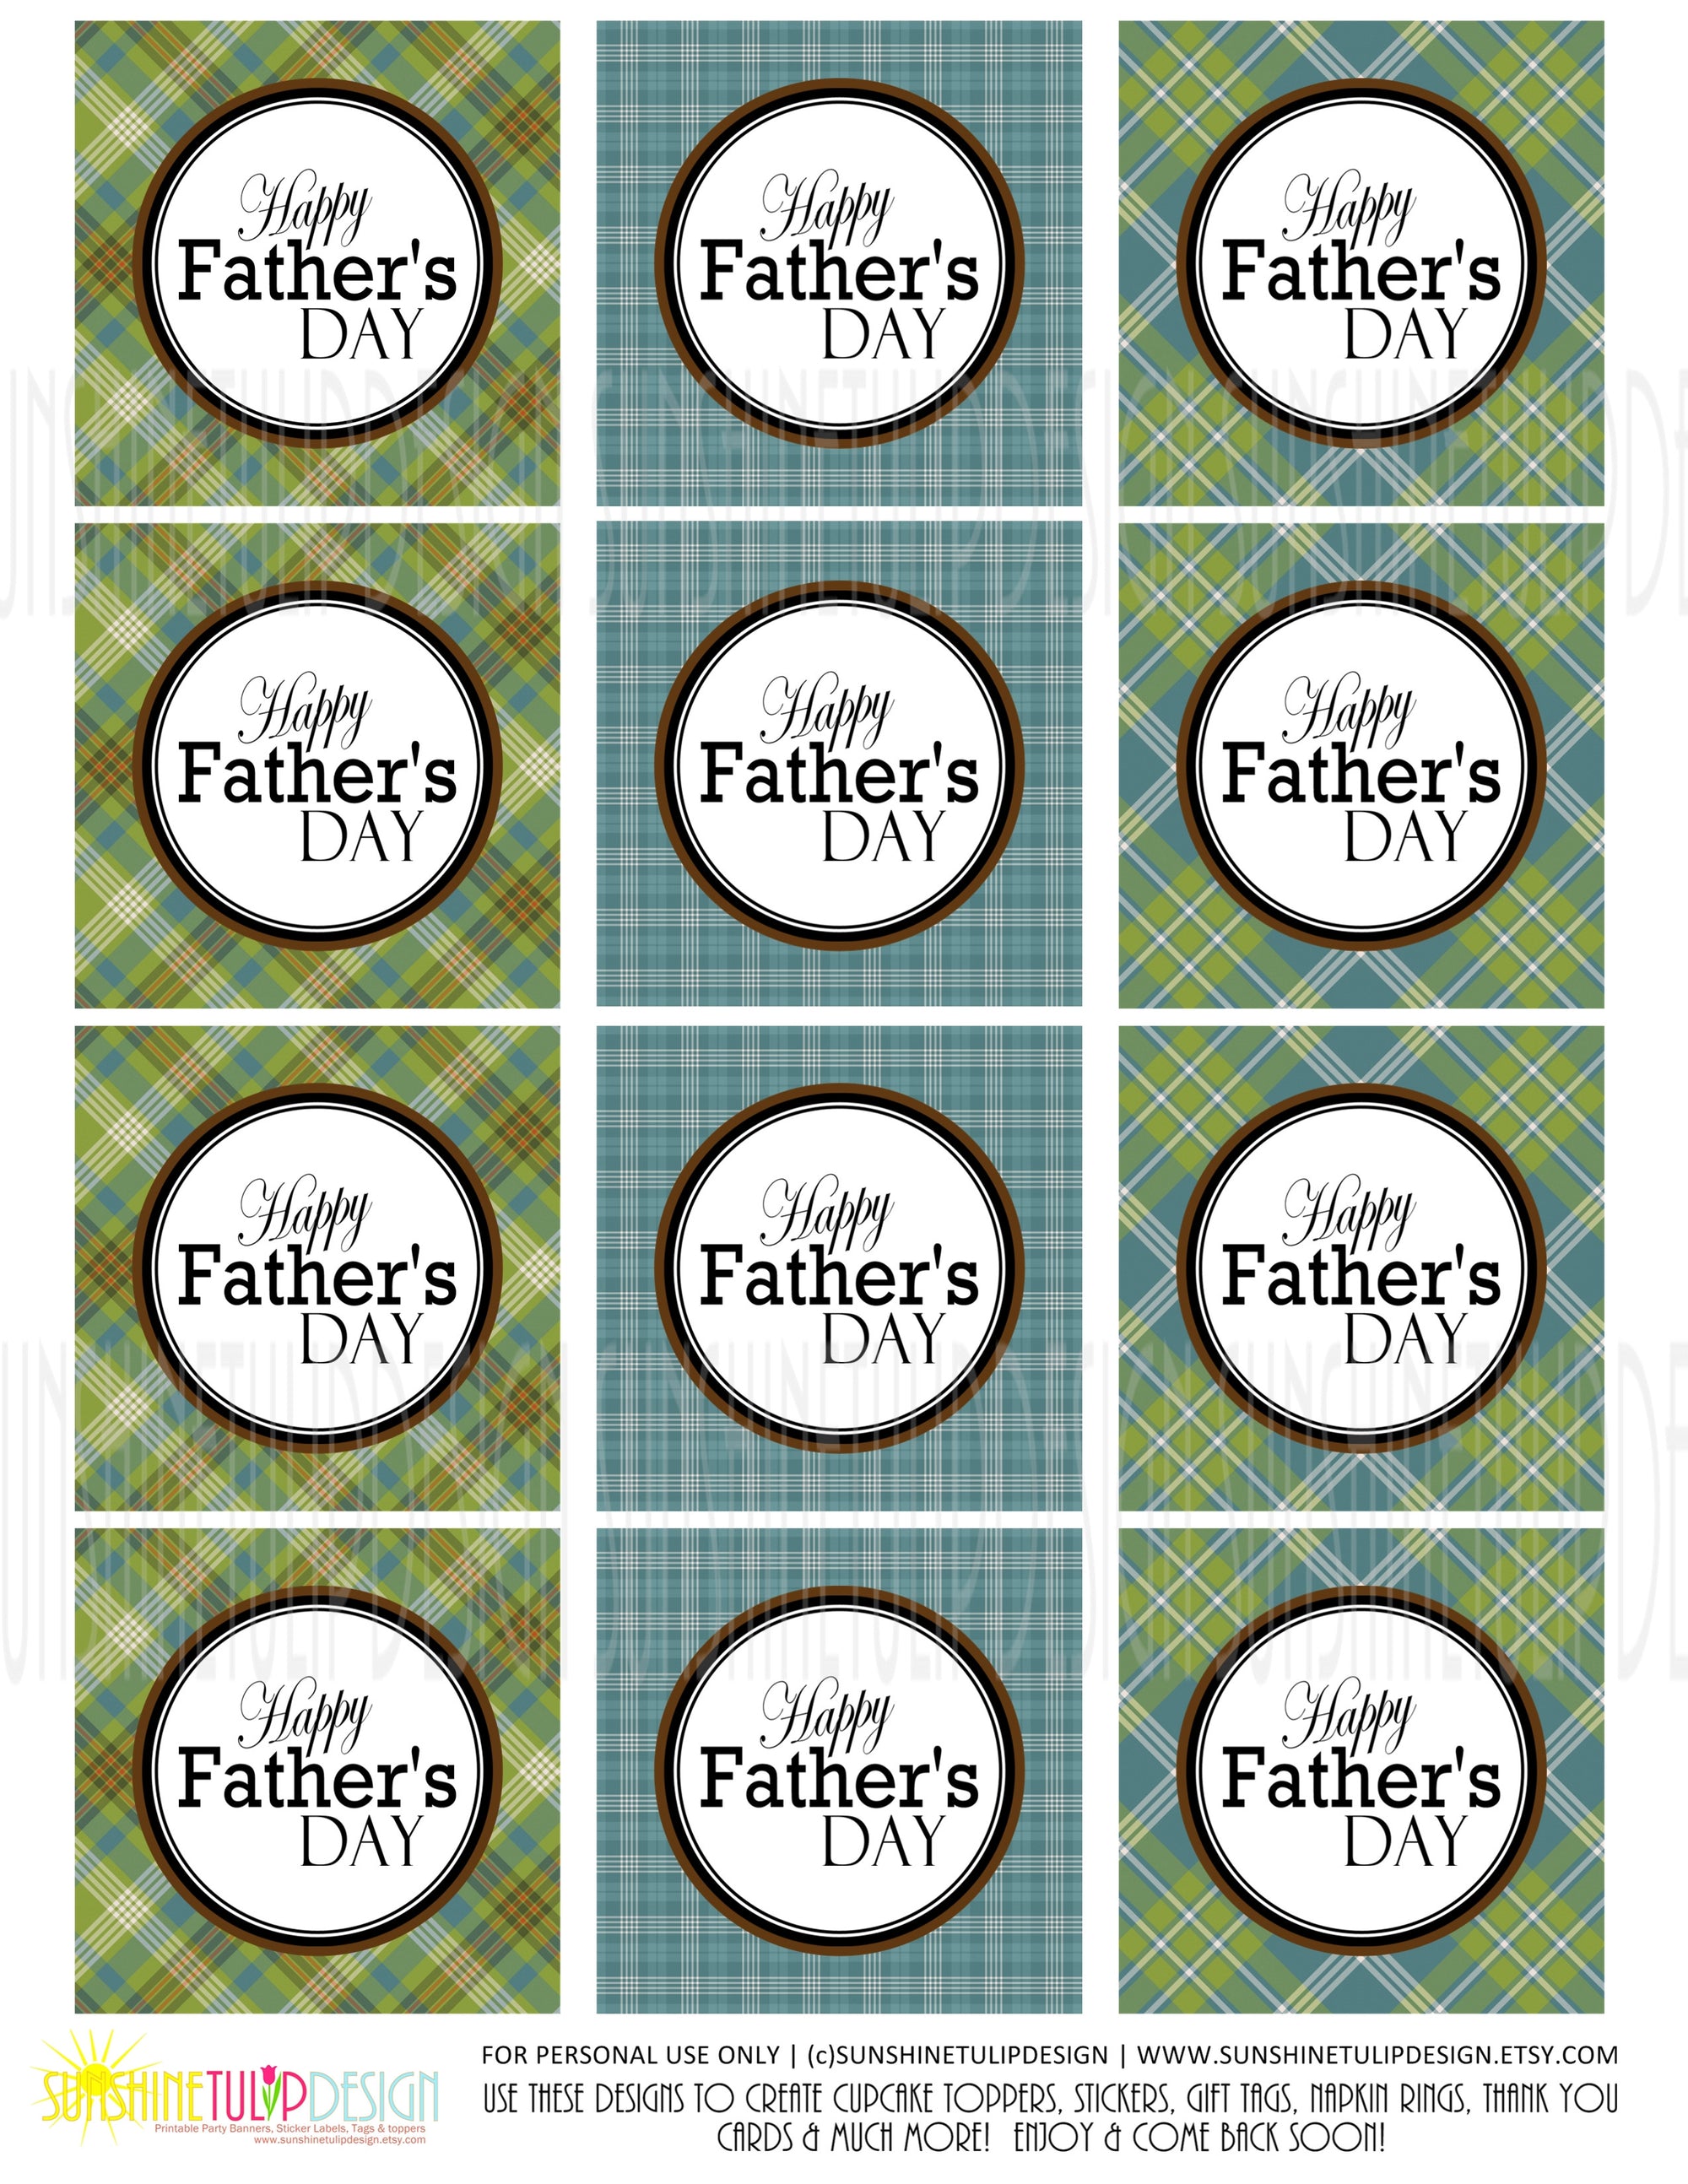 printable-fathers-day-gift-tags-printable-plaid-happy-father-s-day-cu-sunshinetulipdesign